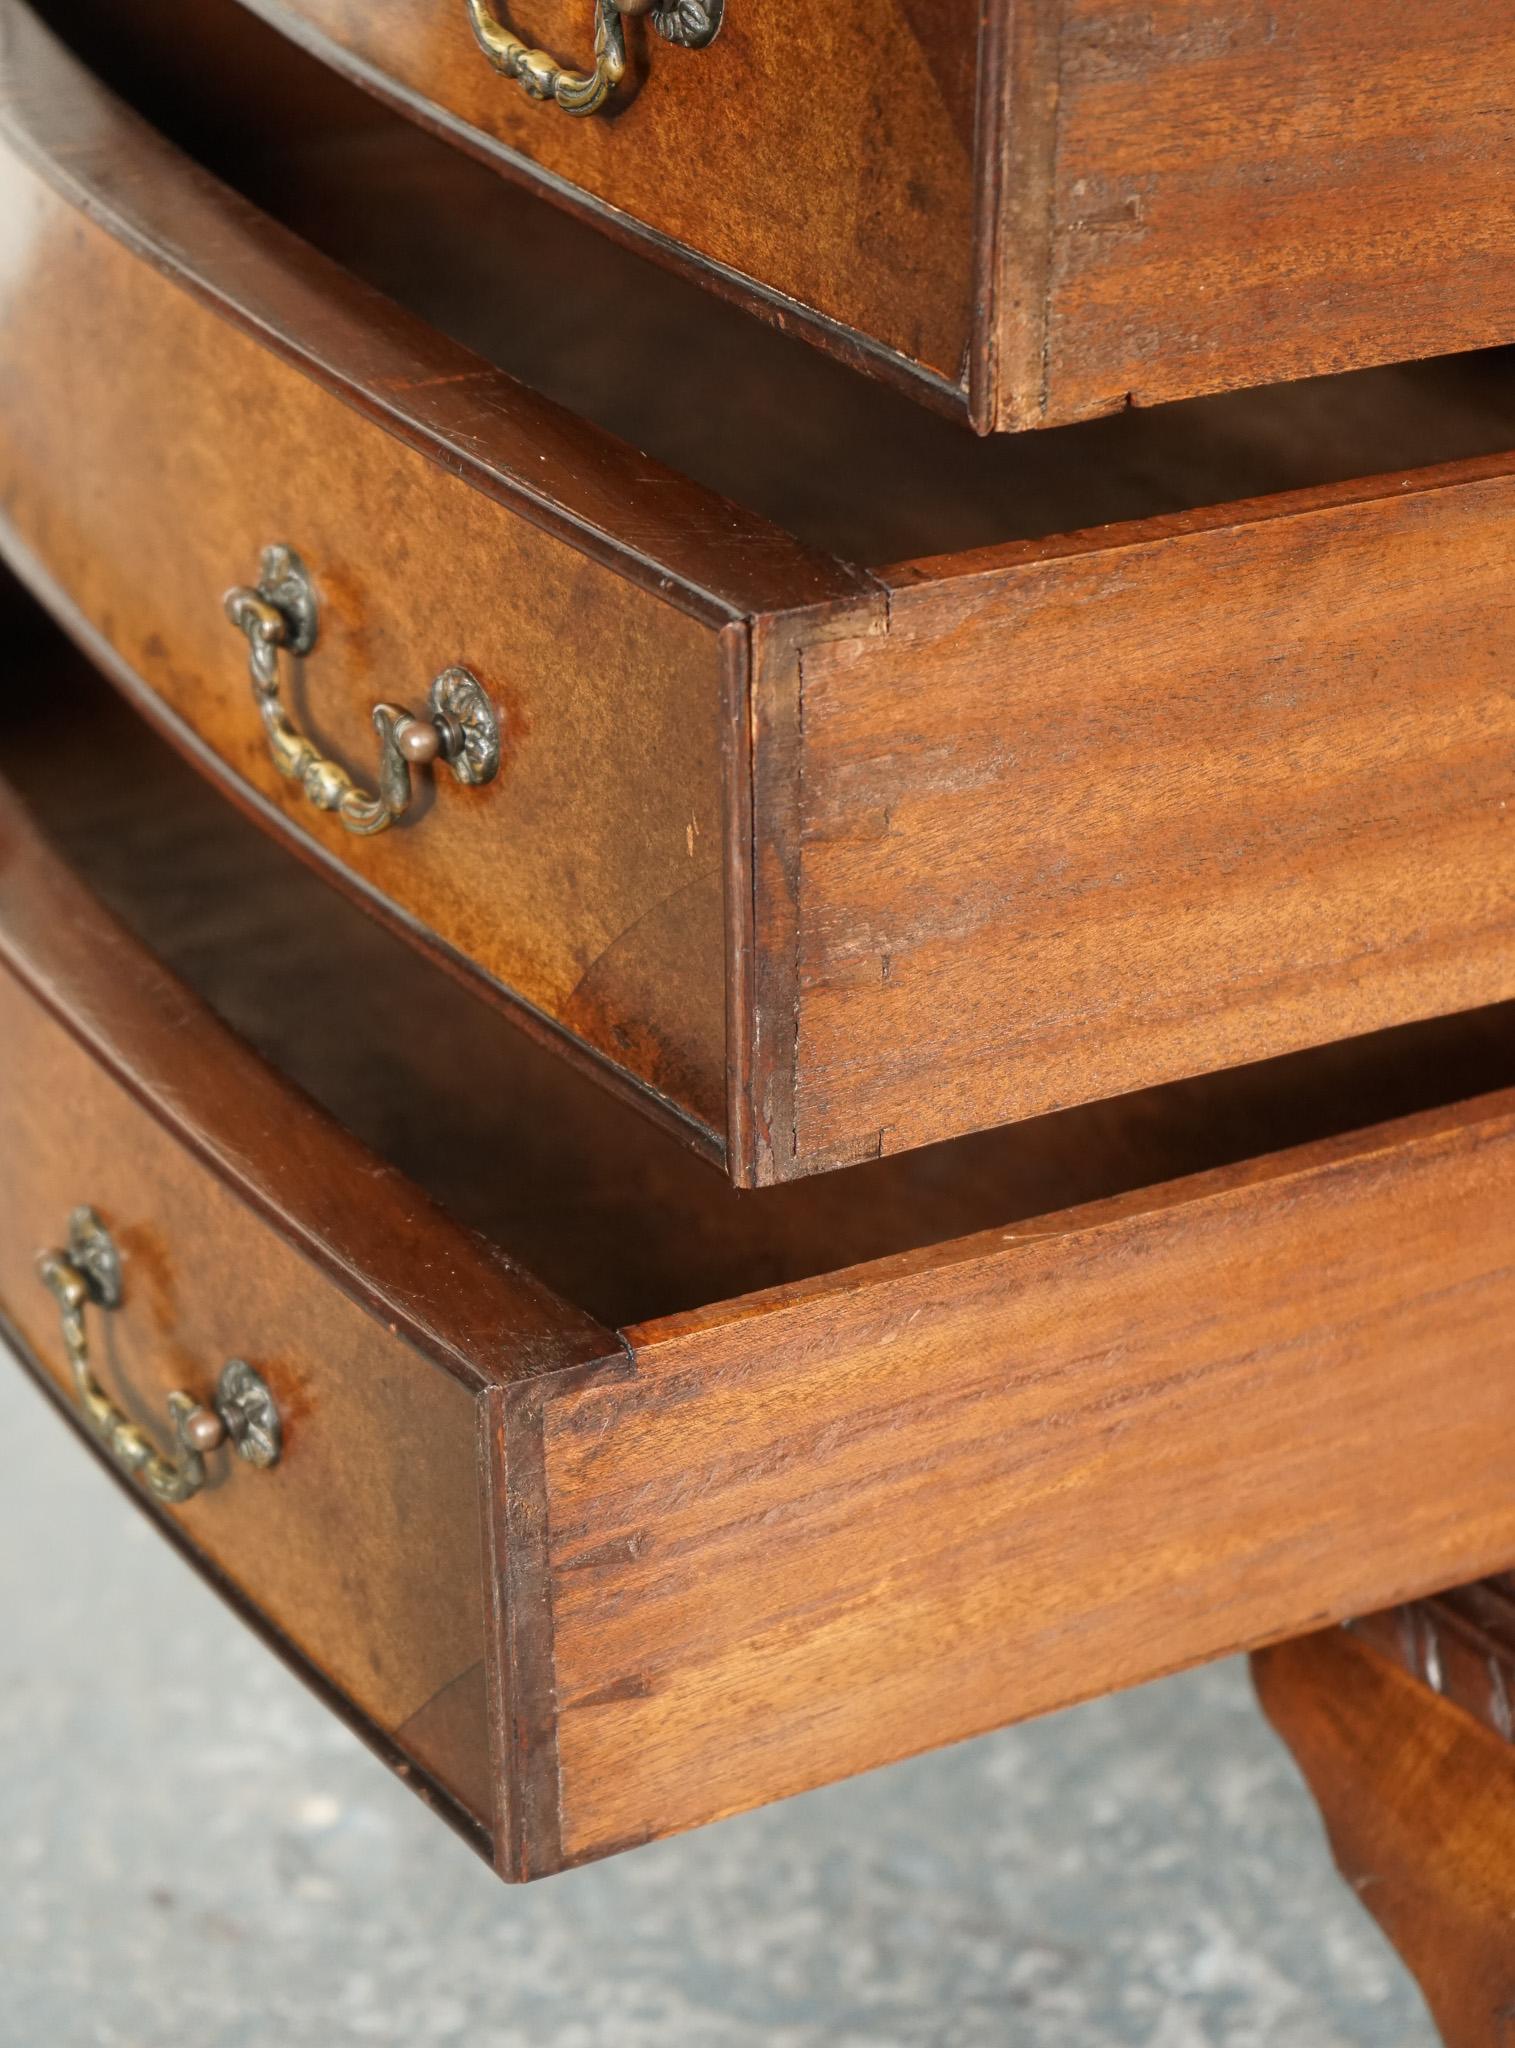 FIGURED VICTORIAN WALNUT BOW FRONTED CHEST OF DRAWERS RAisted ON QUEEN ANNE LEGS im Angebot 1